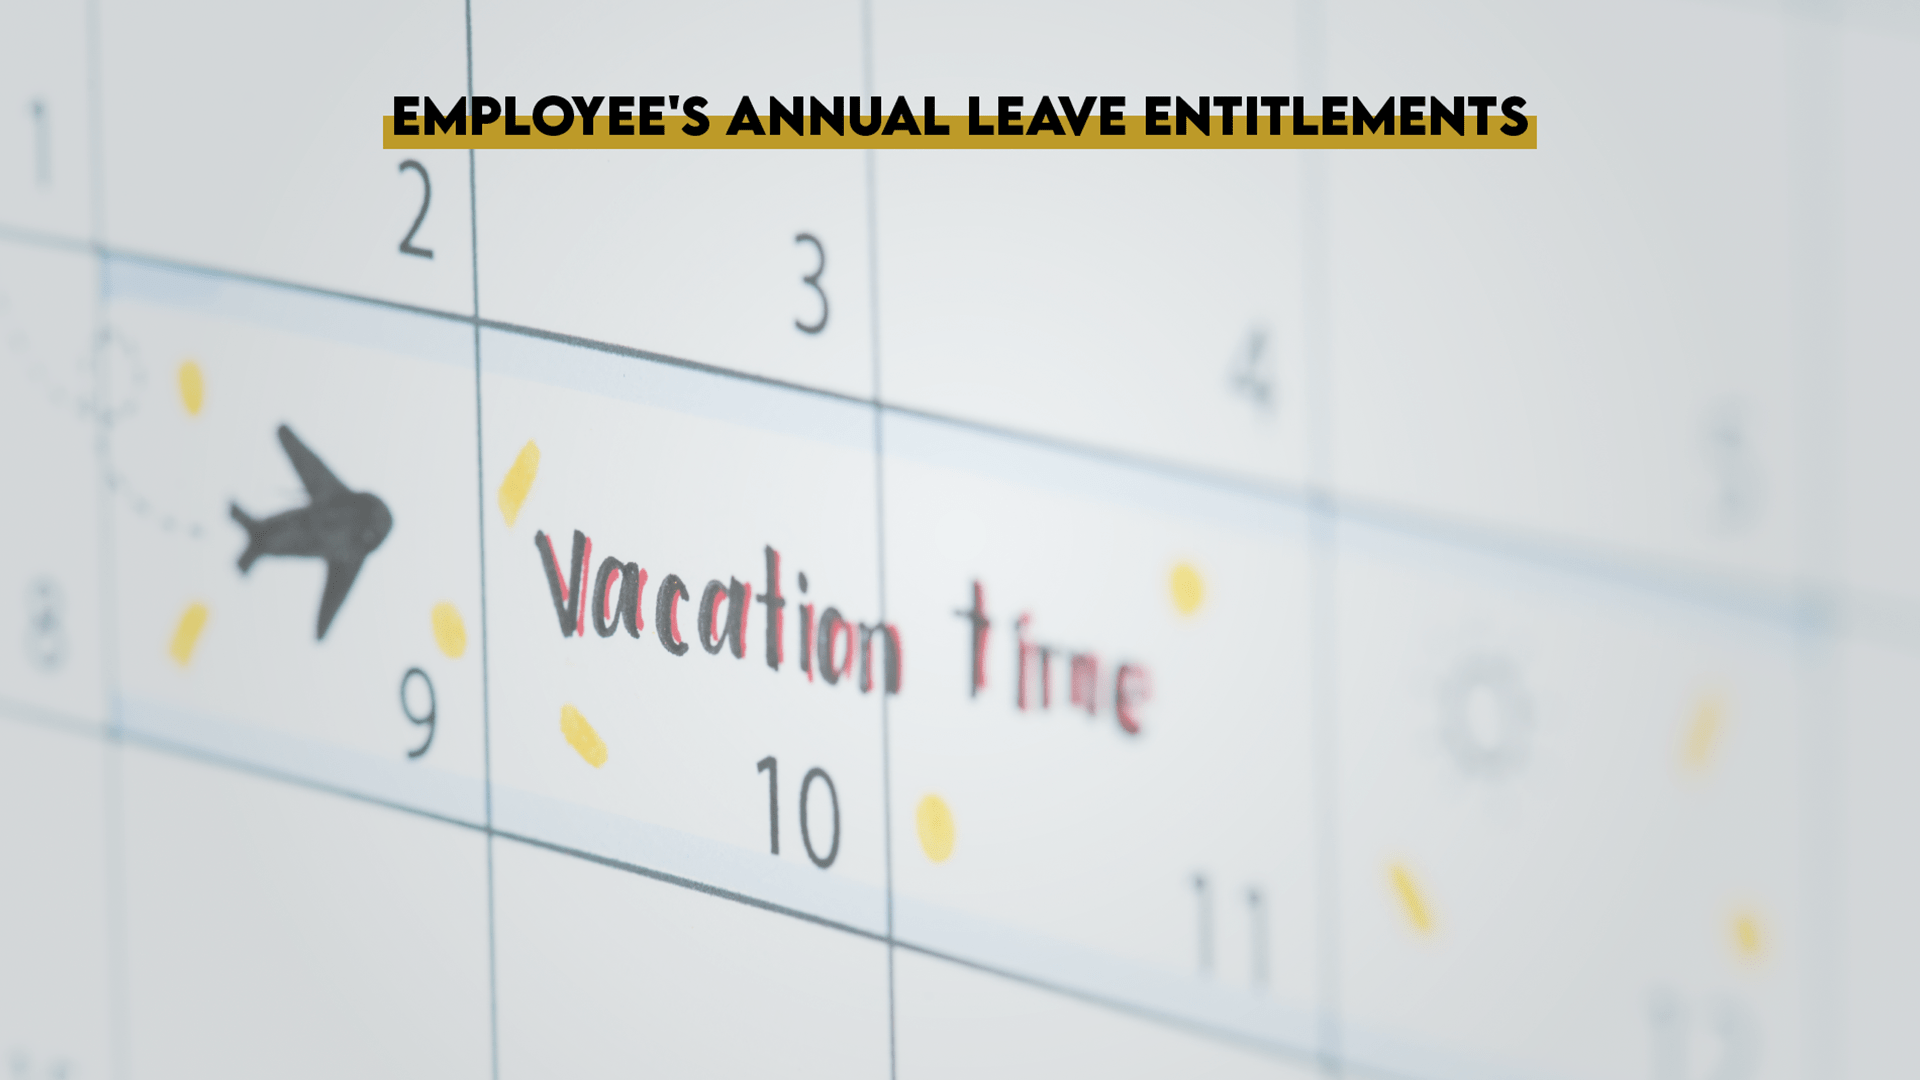 Carrying Forward Annual Leave